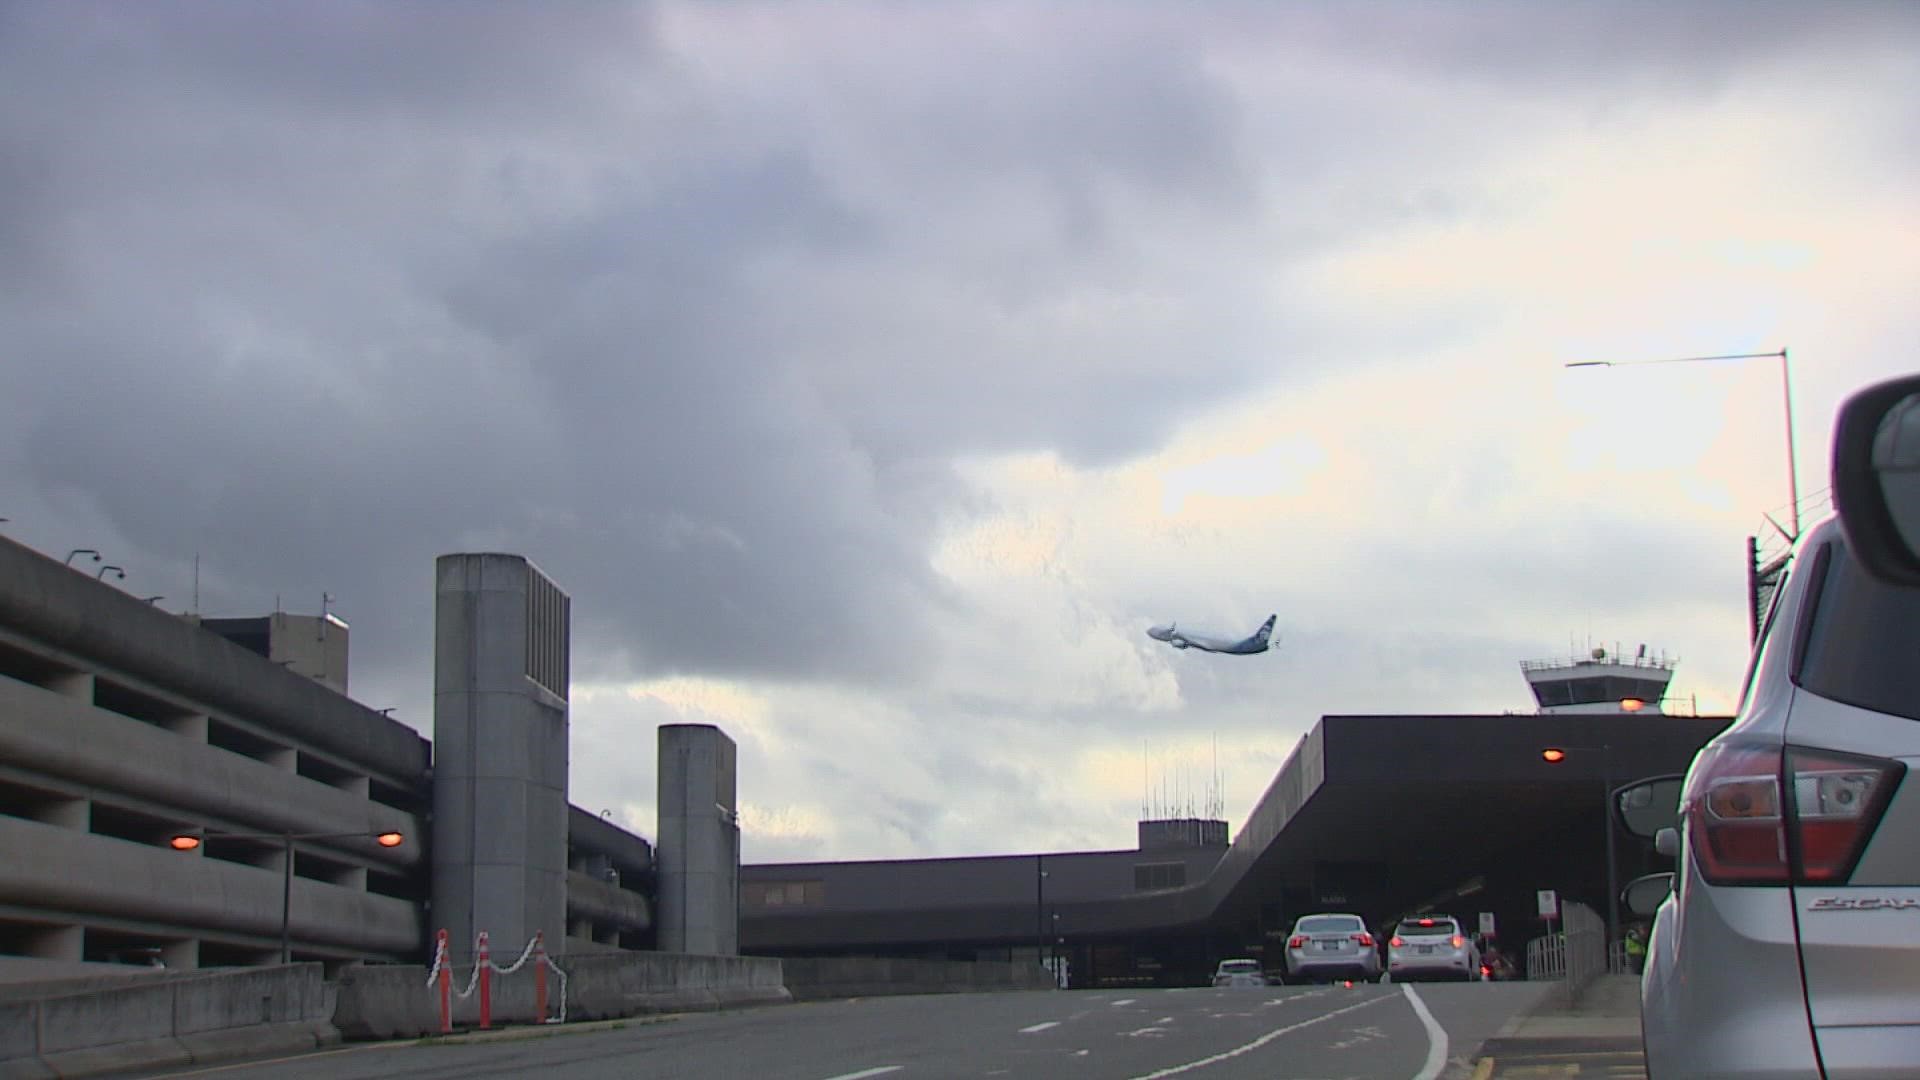 Pierce County objects to state's proposed airport plan